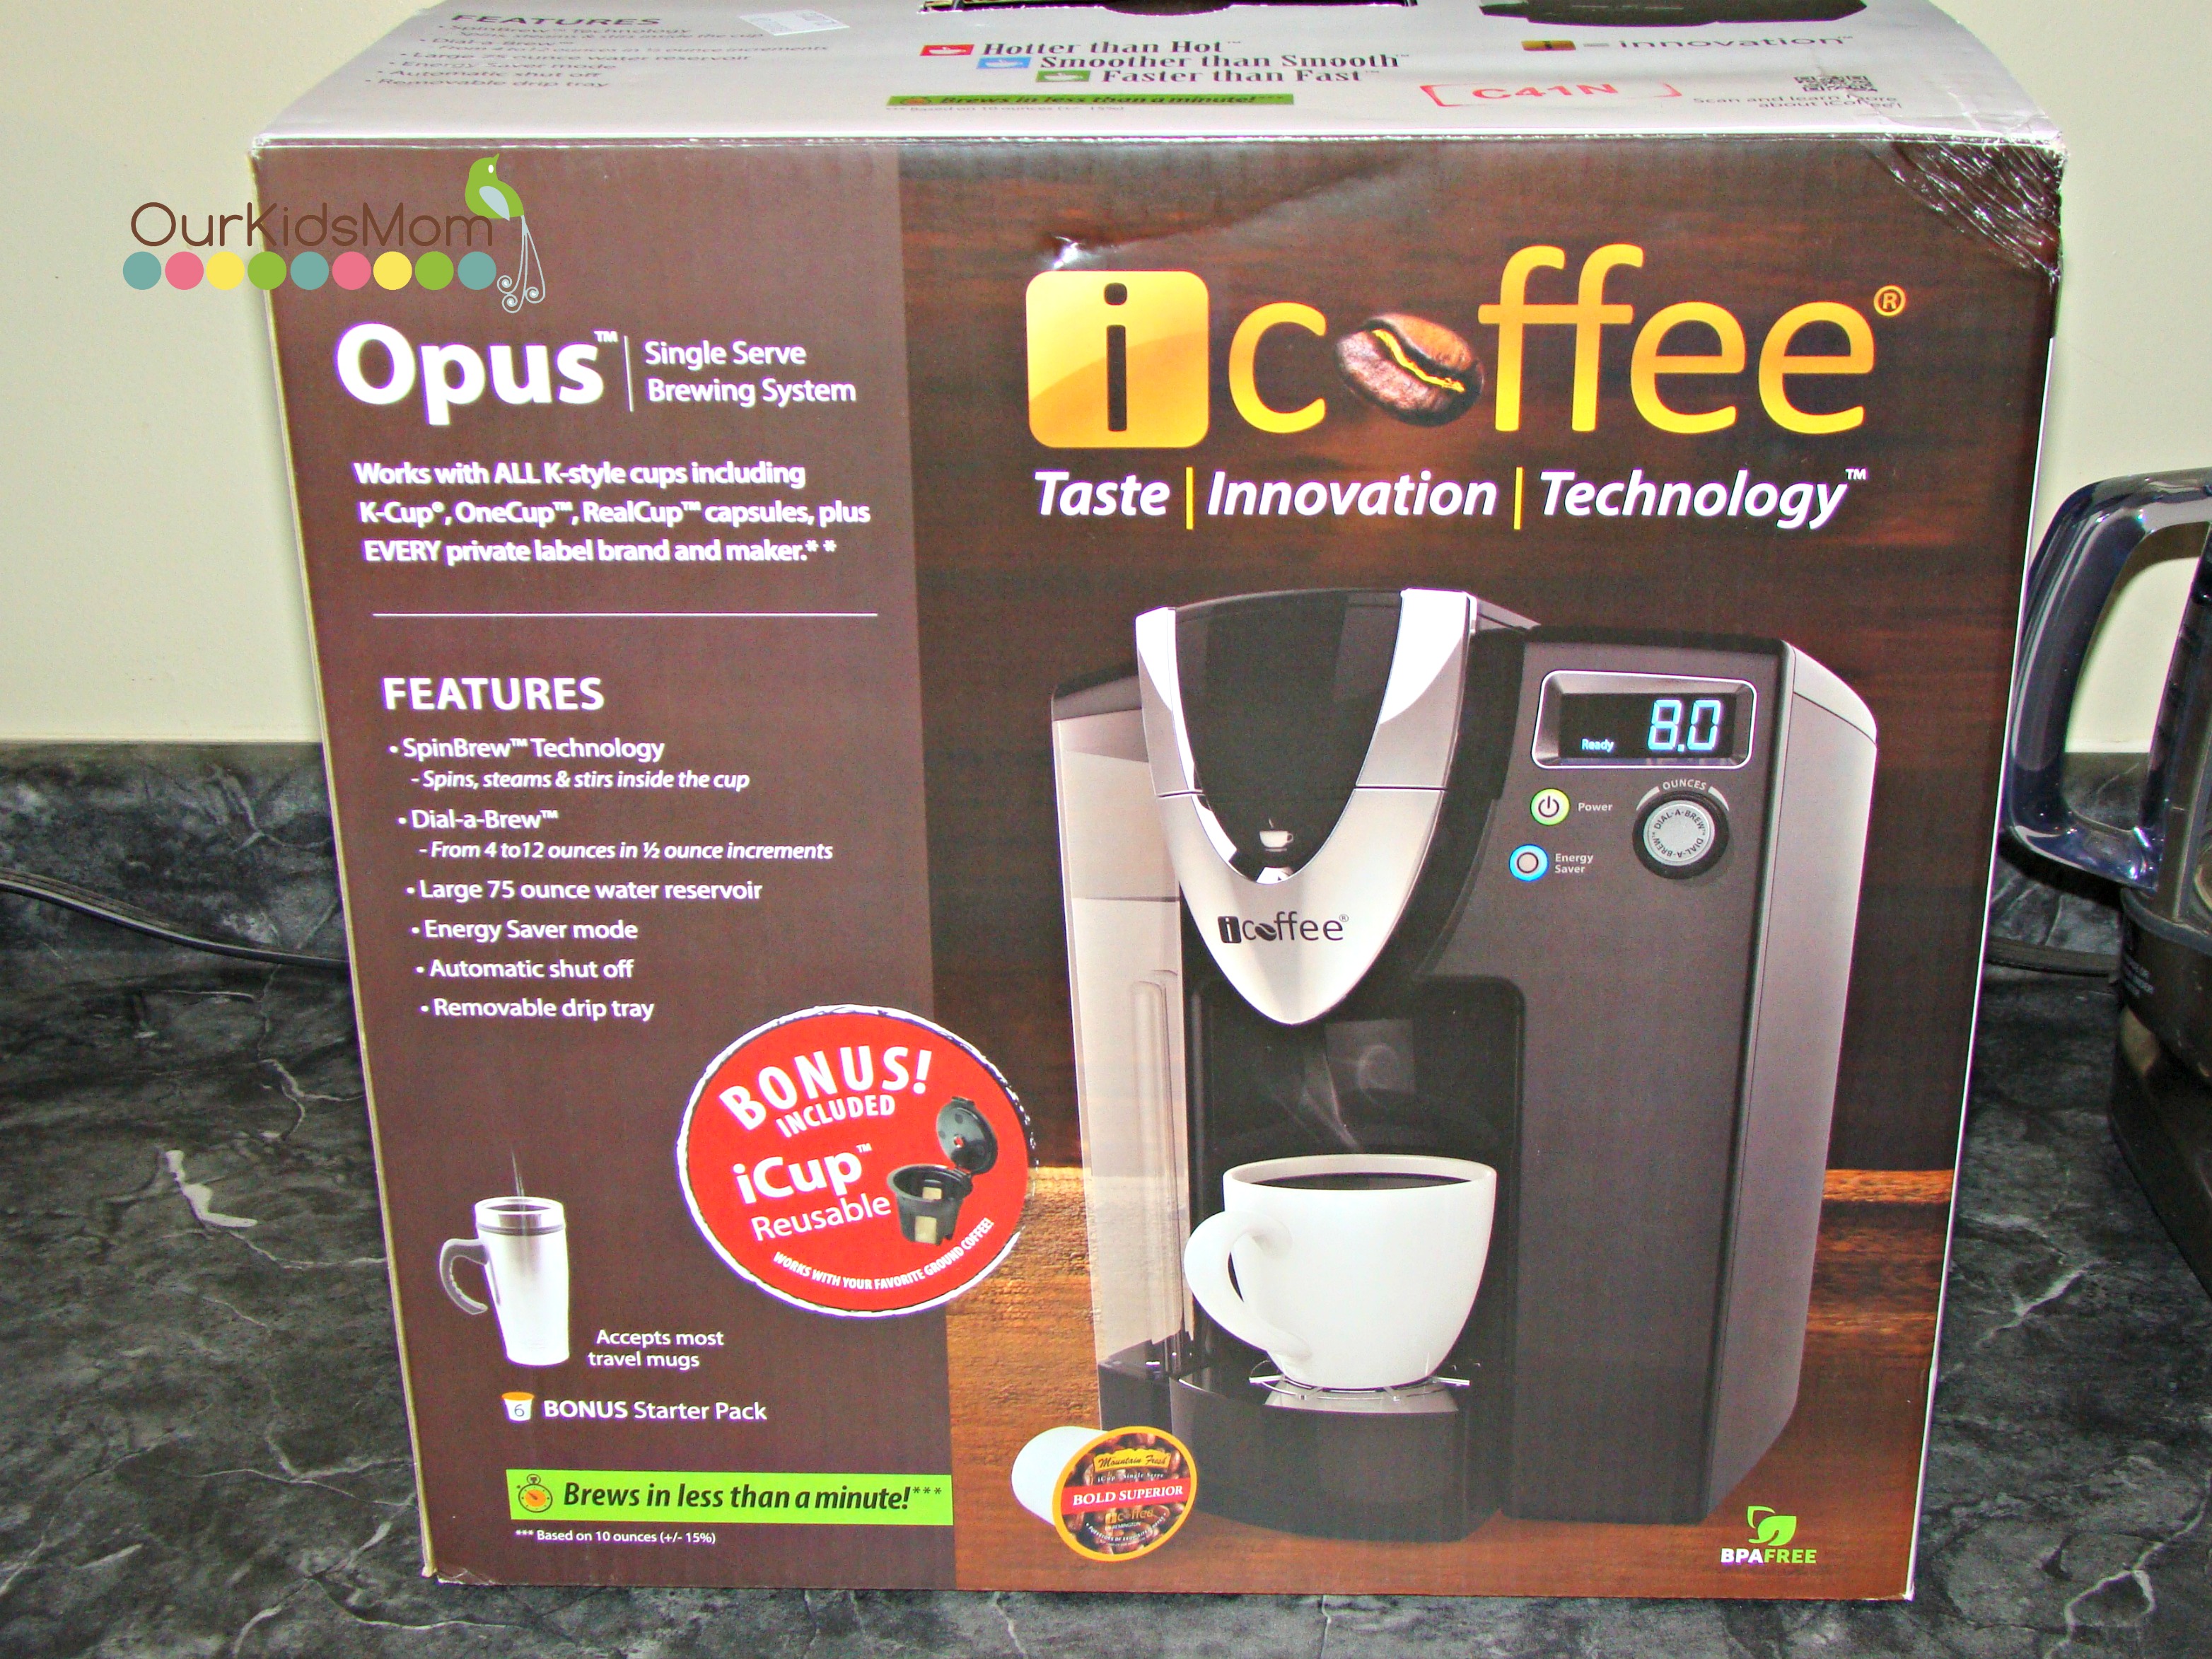 iCoffee Opus Single Serve Brewing System - OurKidsMom